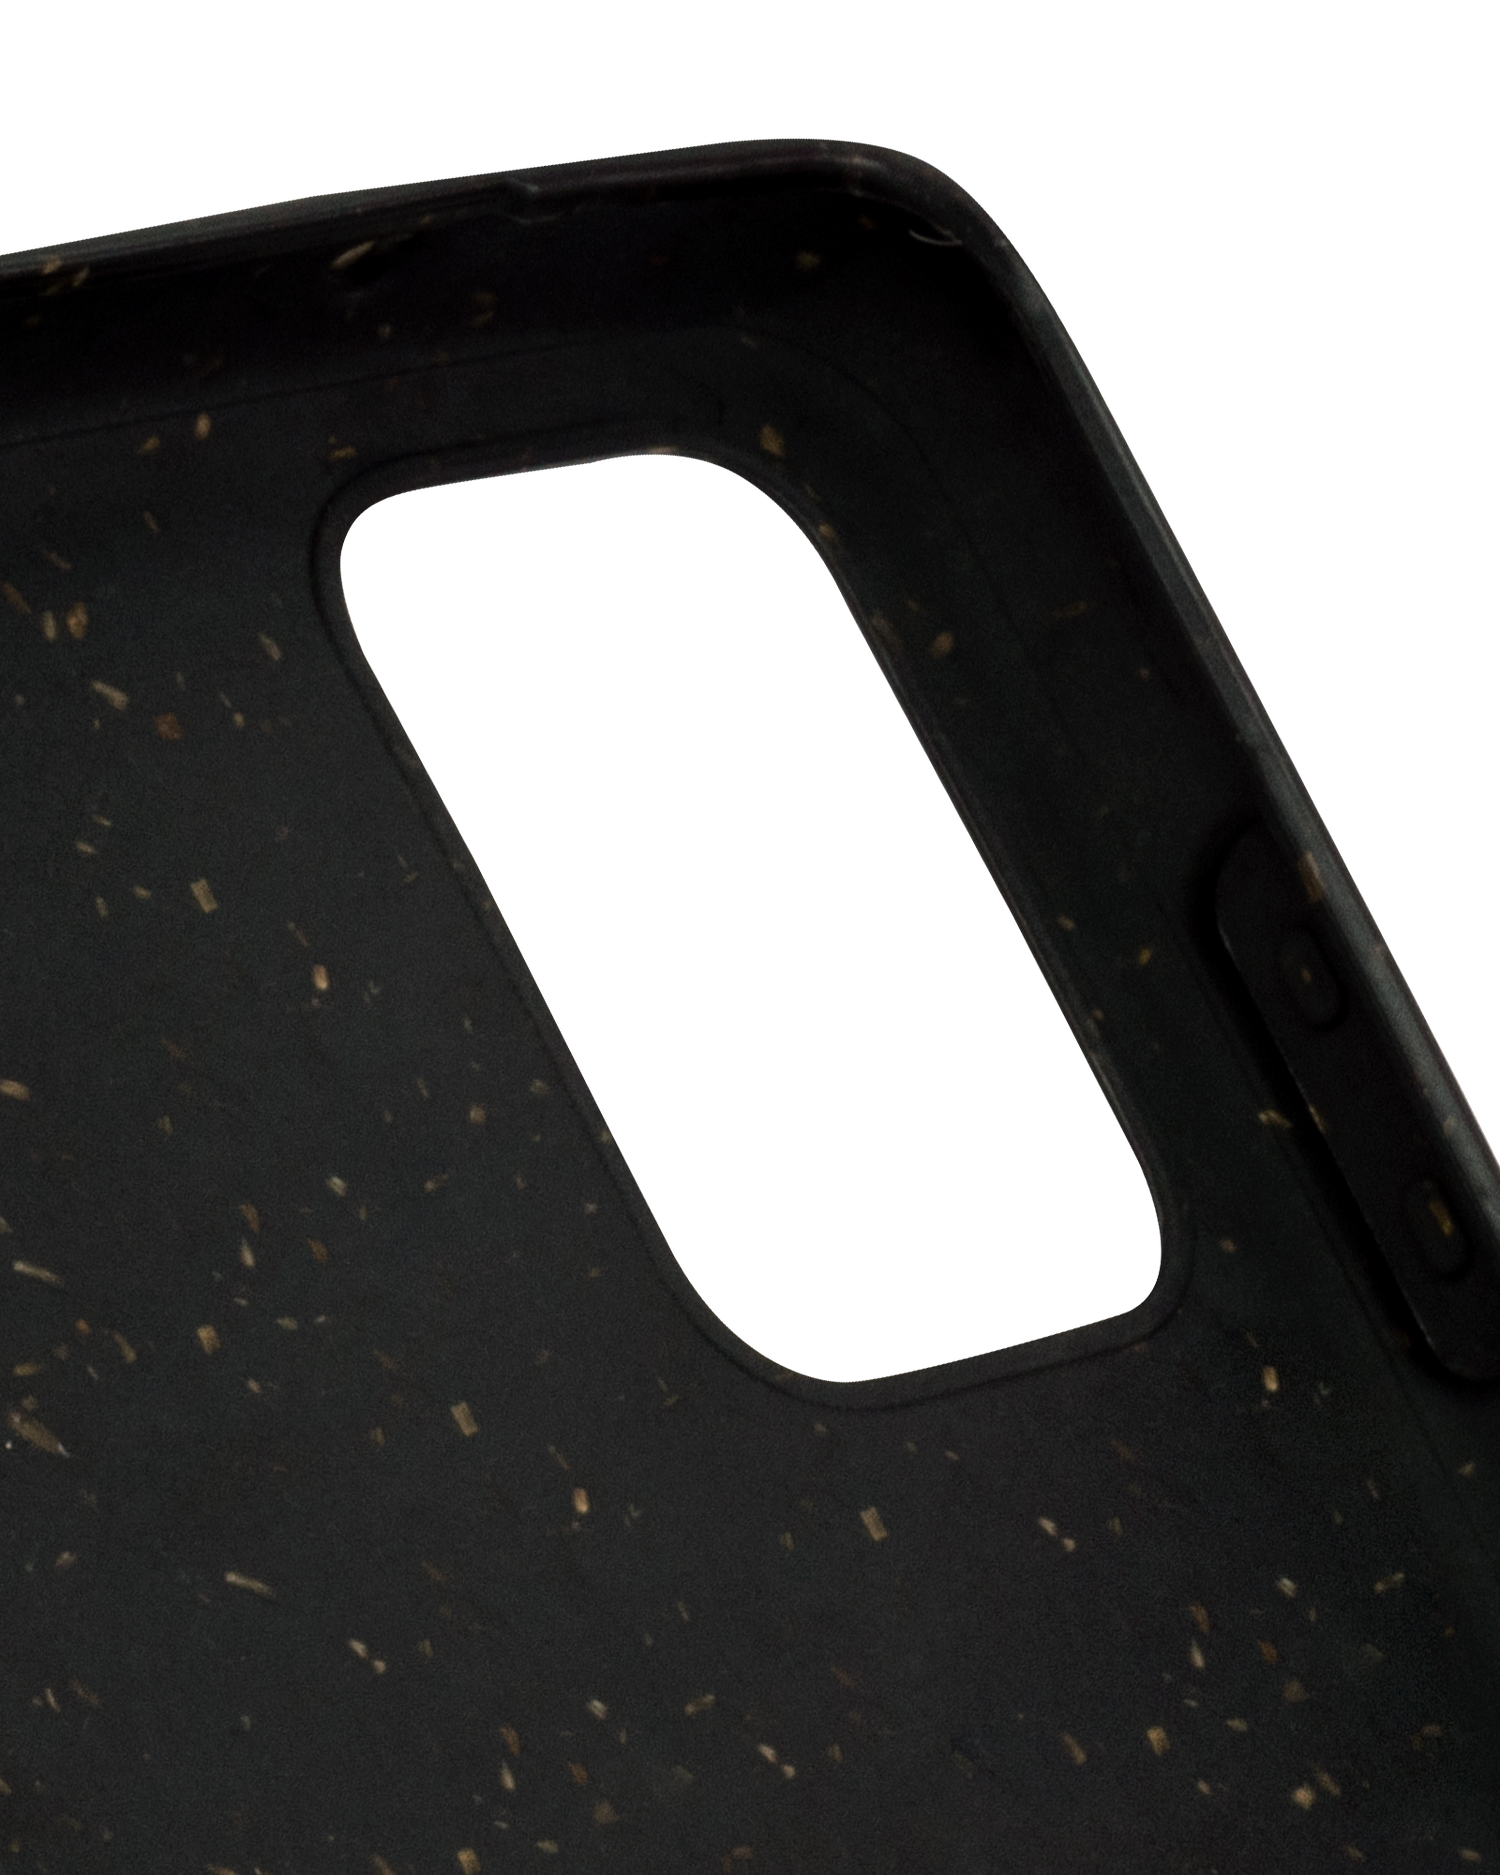 Black Eco-Friendly Phone Case for Samsung Galaxy S20 Plus: Details inside